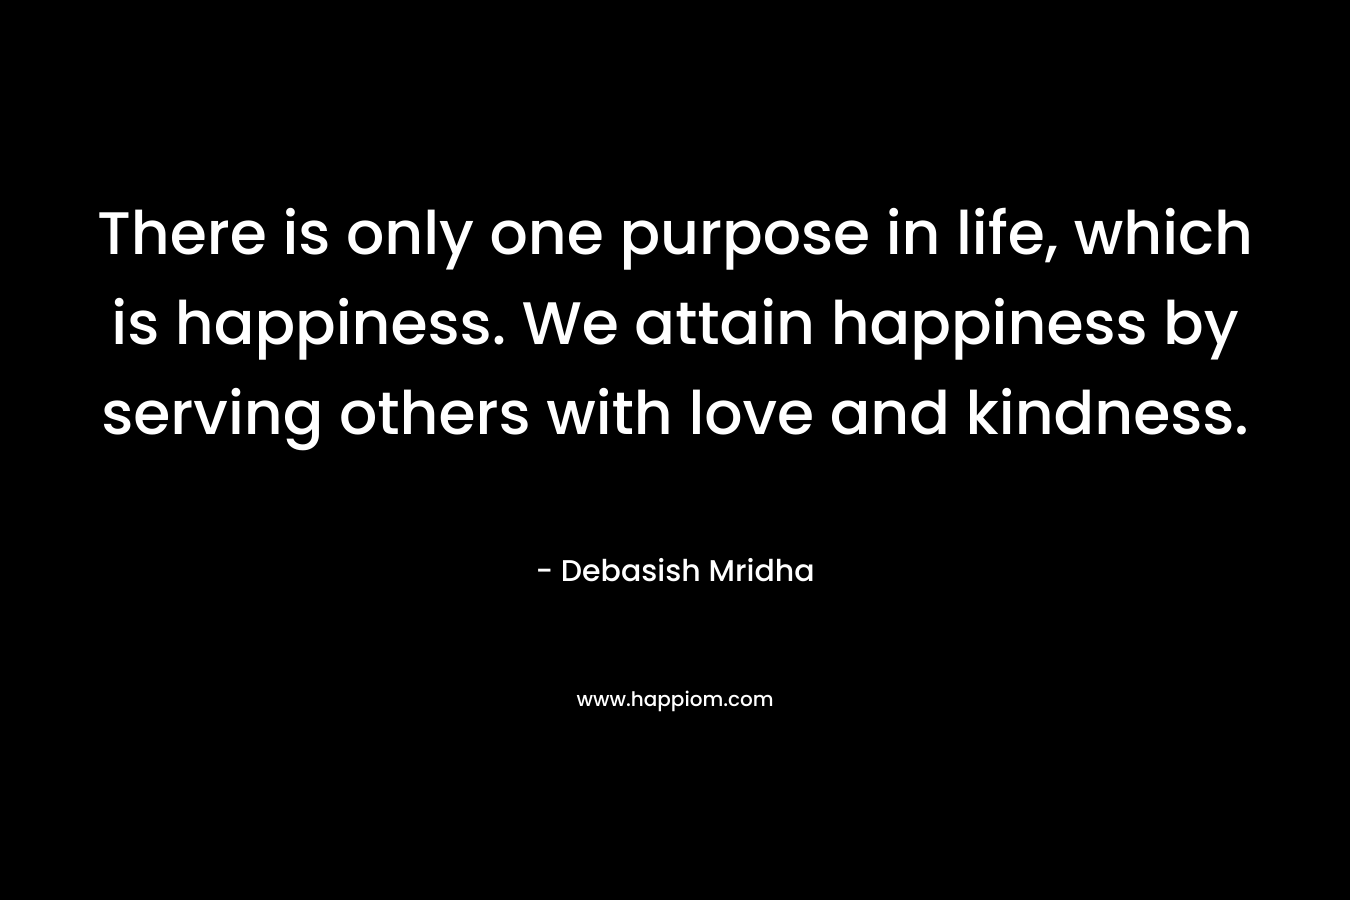 There is only one purpose in life, which is happiness. We attain happiness by serving others with love and kindness.